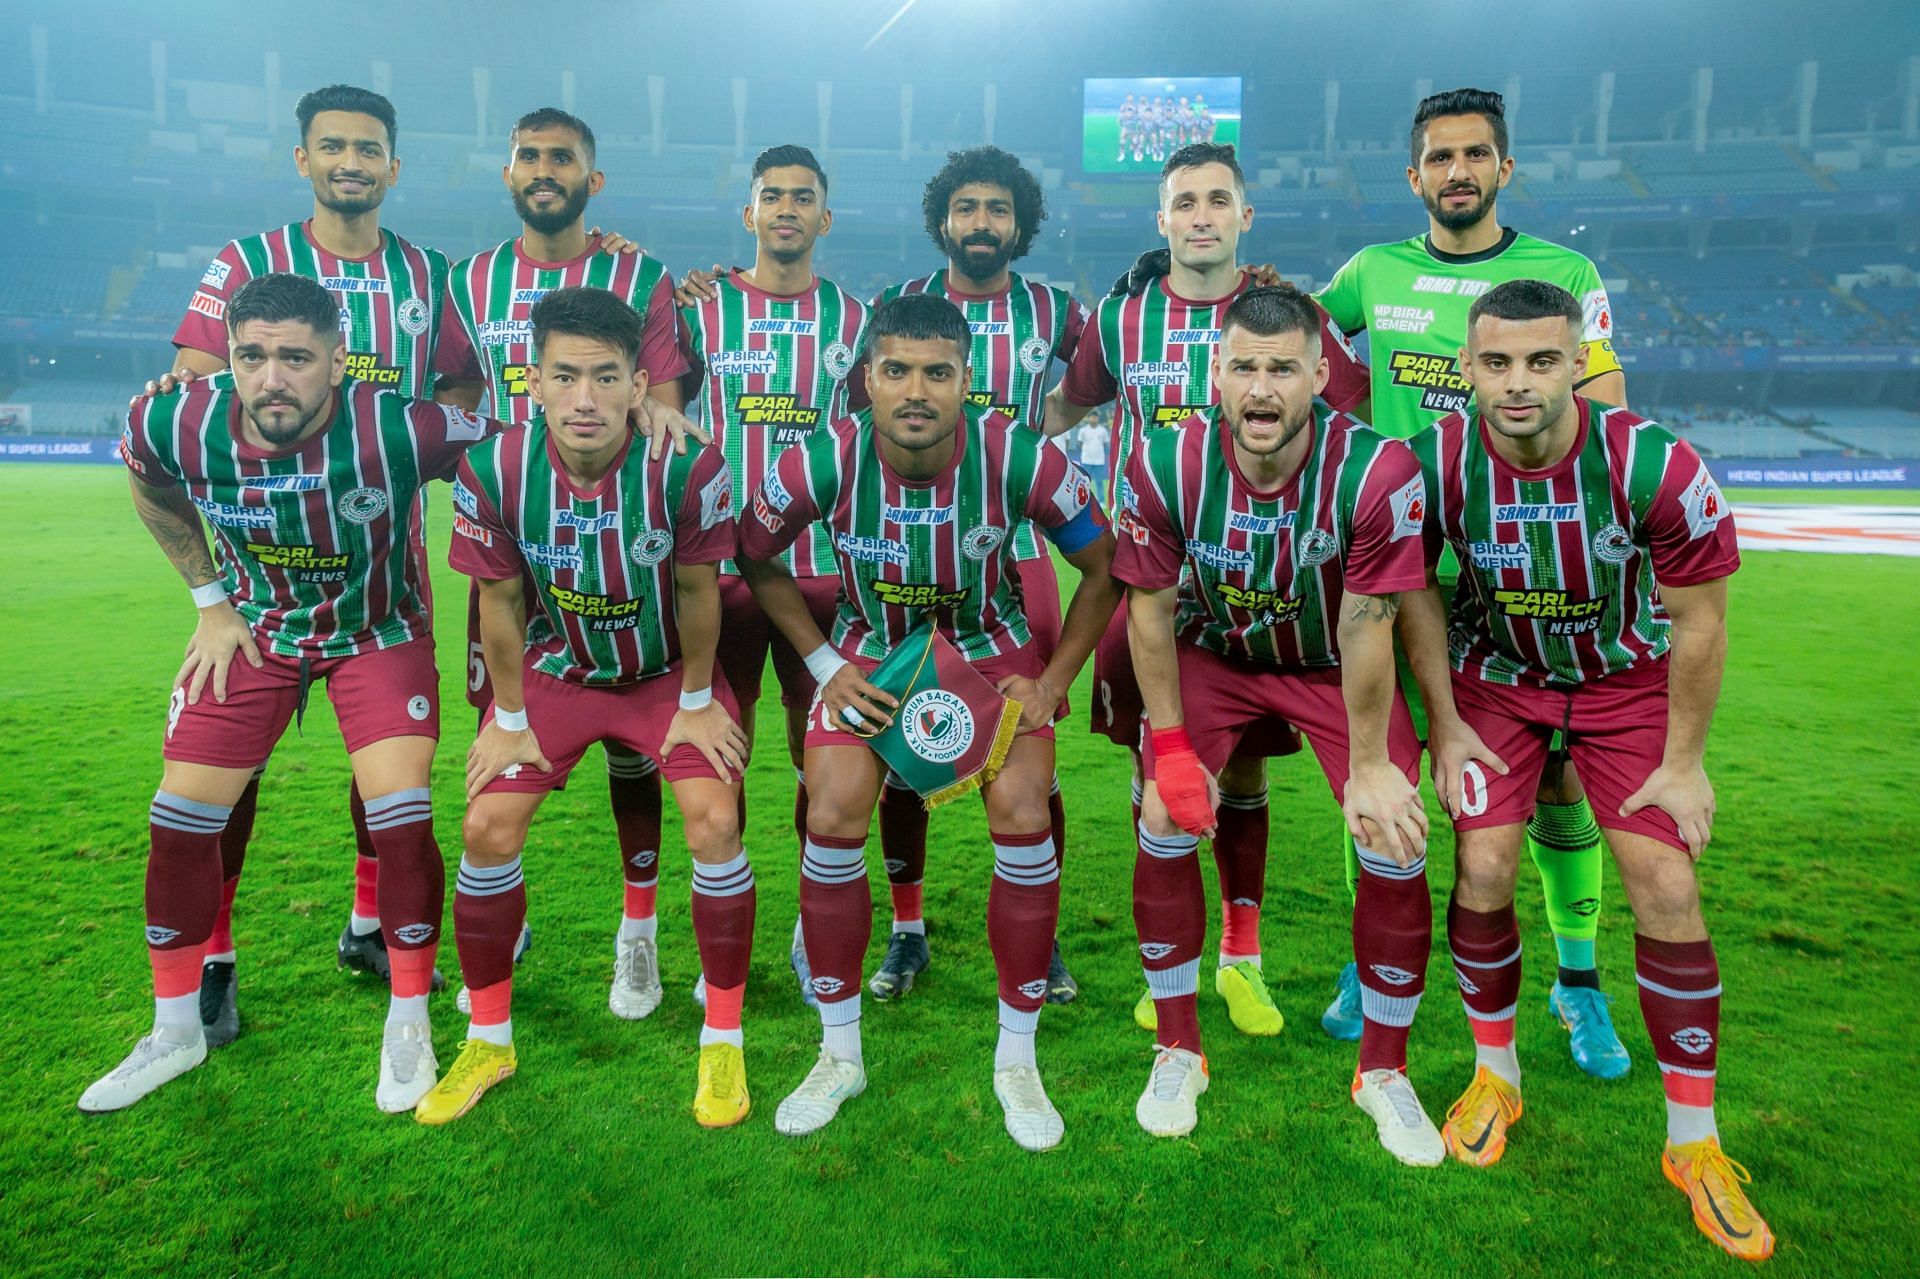 ATK Mohun Bagan were trailing early on in the game.